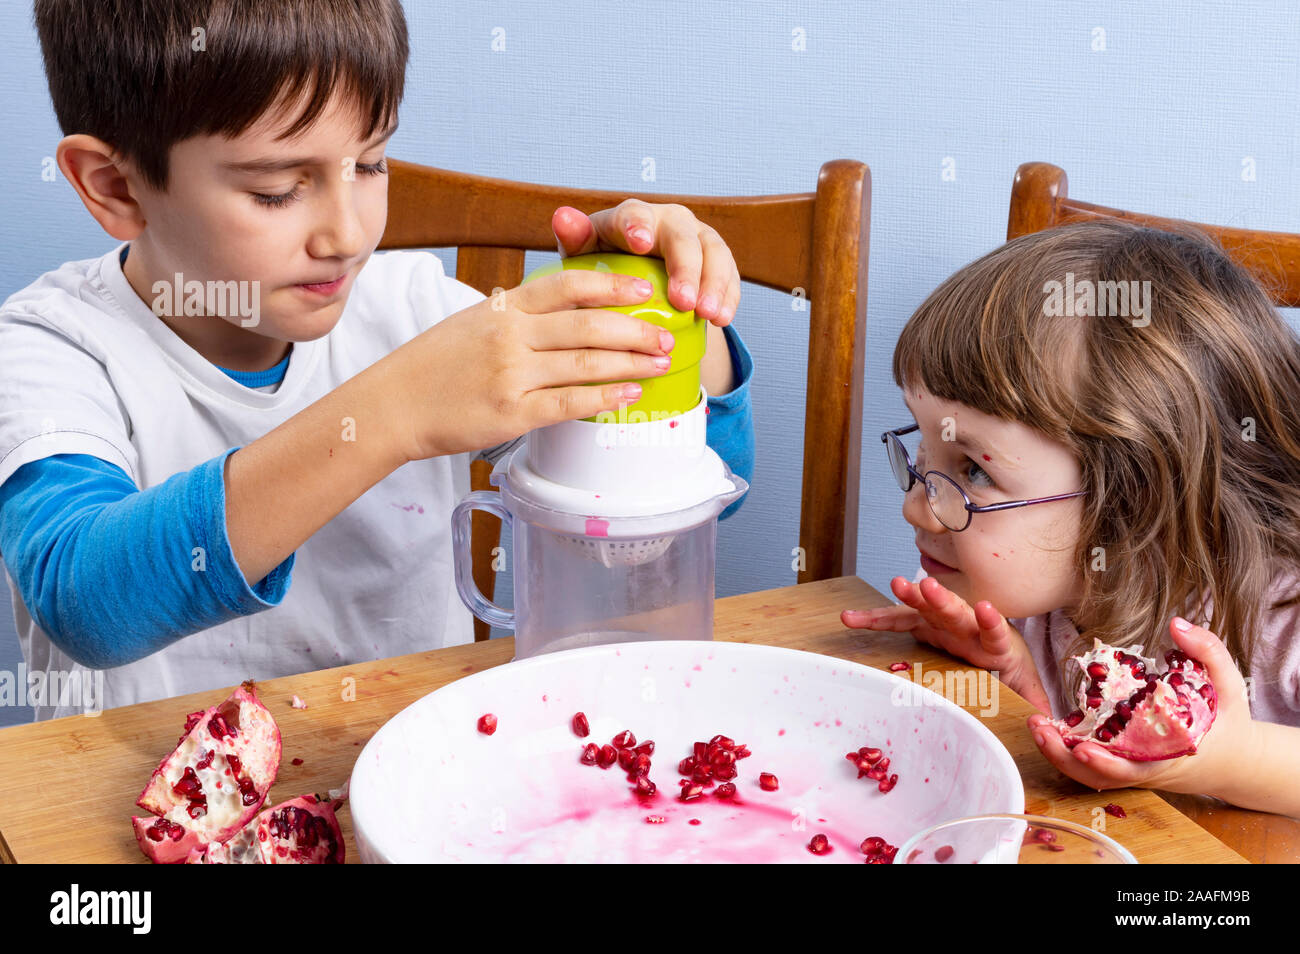 Young boy and girl siblings squeeze pomegranate juice, making a mess. Face and clothes dirty with red spots. Healthy food concept. Stock Photo